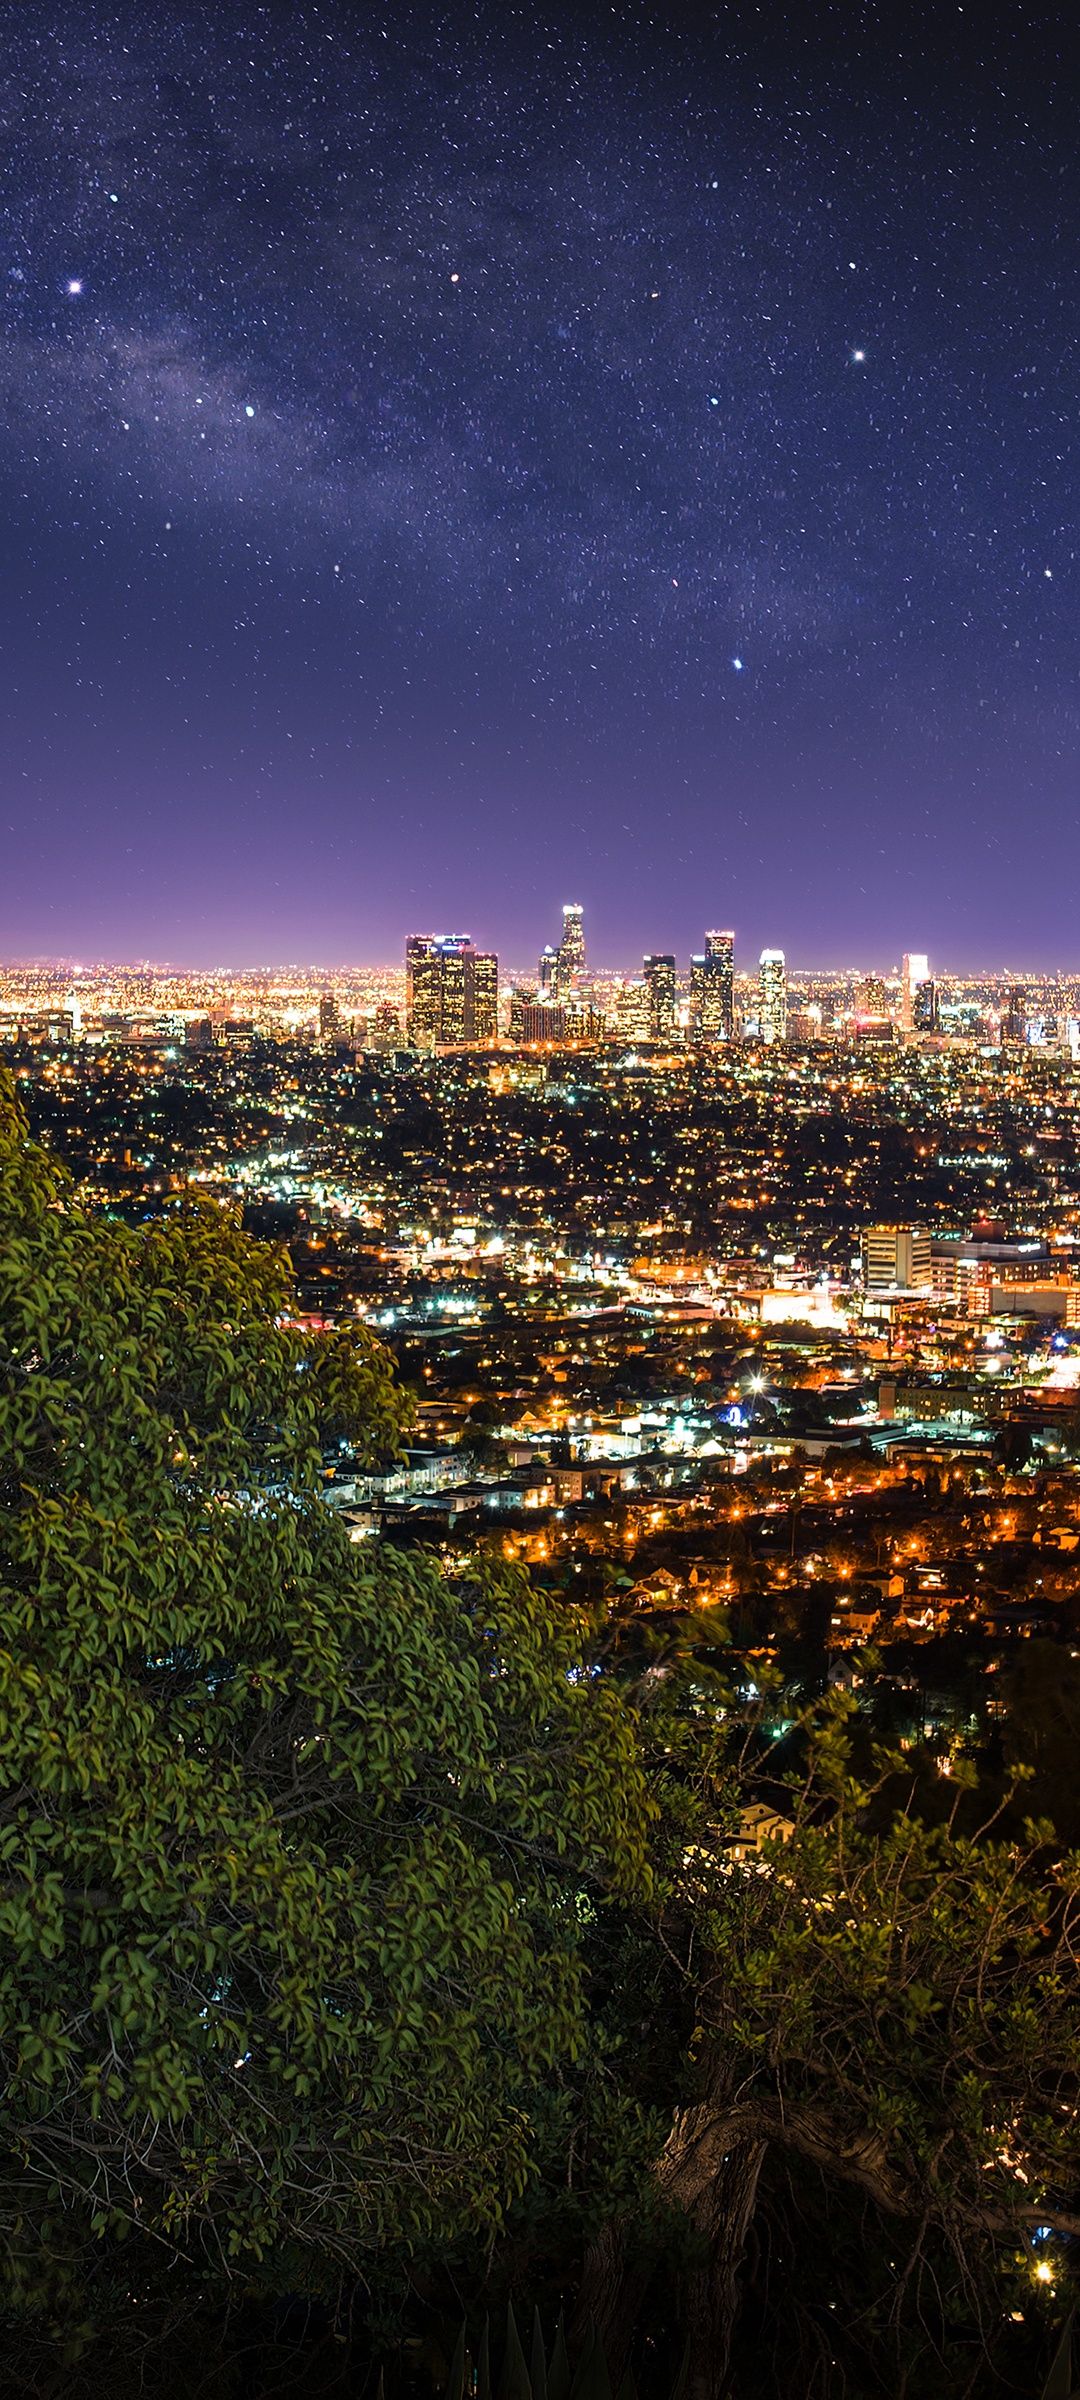 A city skyline at night with stars in the background - Los Angeles